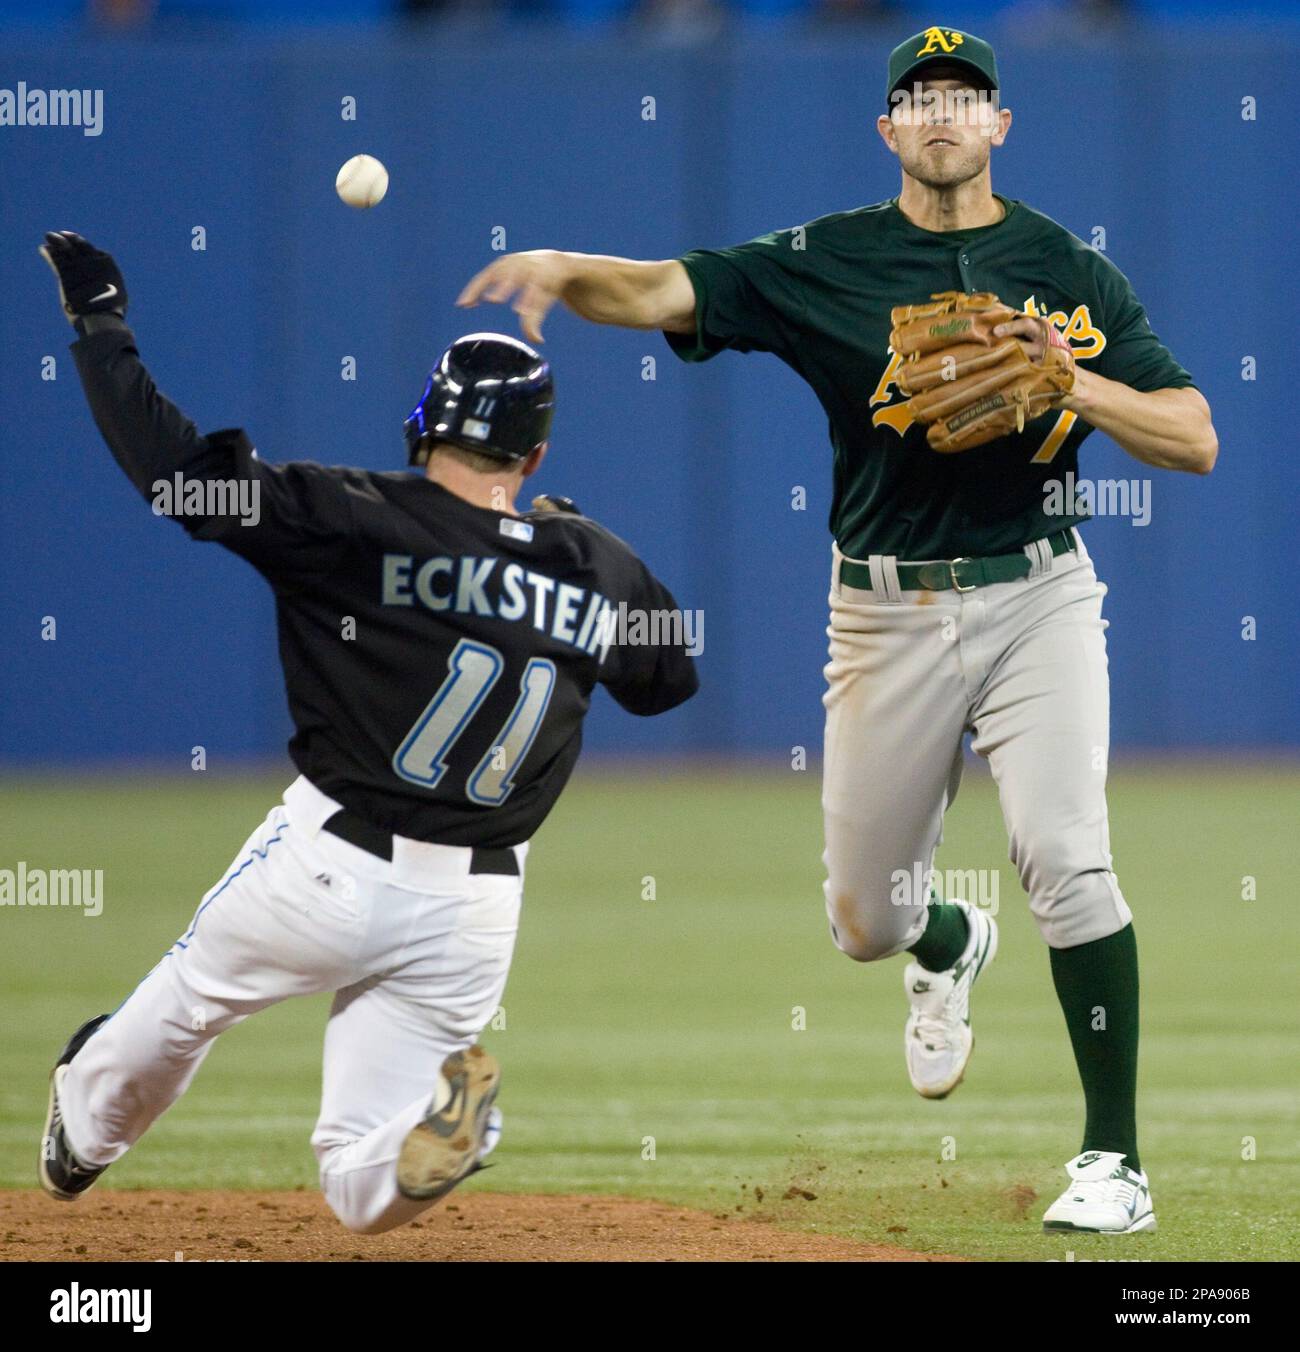 Oakland Athletics' short stop Bobby Crosby makes the throw to first for the  double play on Toronto Blue Jays' David Eckstein on a hit from Matt Stairs  in the second inning of